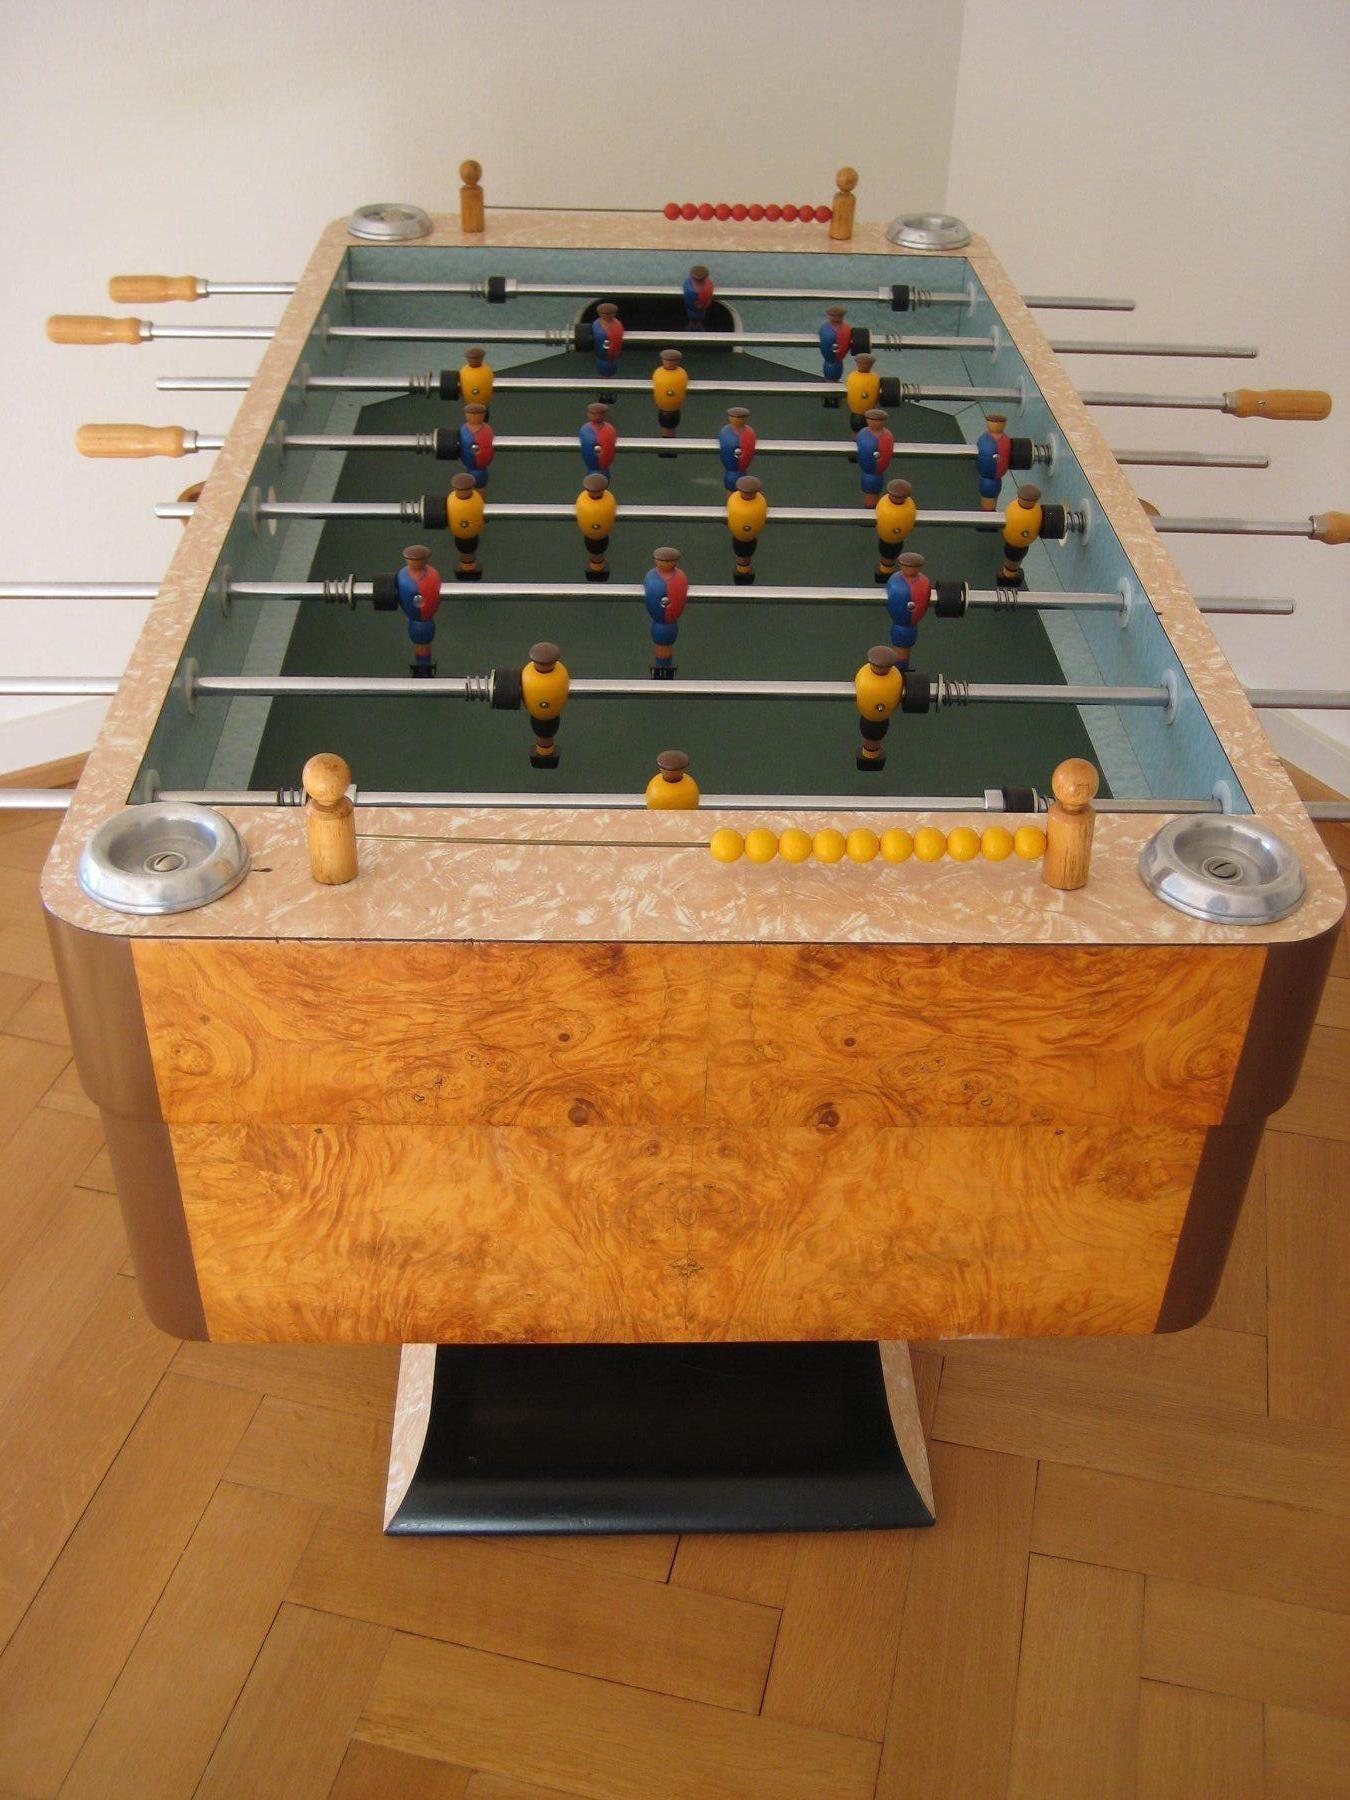 Art Deco football table

Very rare and well preserved toggle box presumably 1940s-1950s. Brand Sporlux (Geneva). Beautiful burl wood veneer, sand-blasted glass top, wooden player hand painted with original jerseys of FCB and YB. 20 centimes